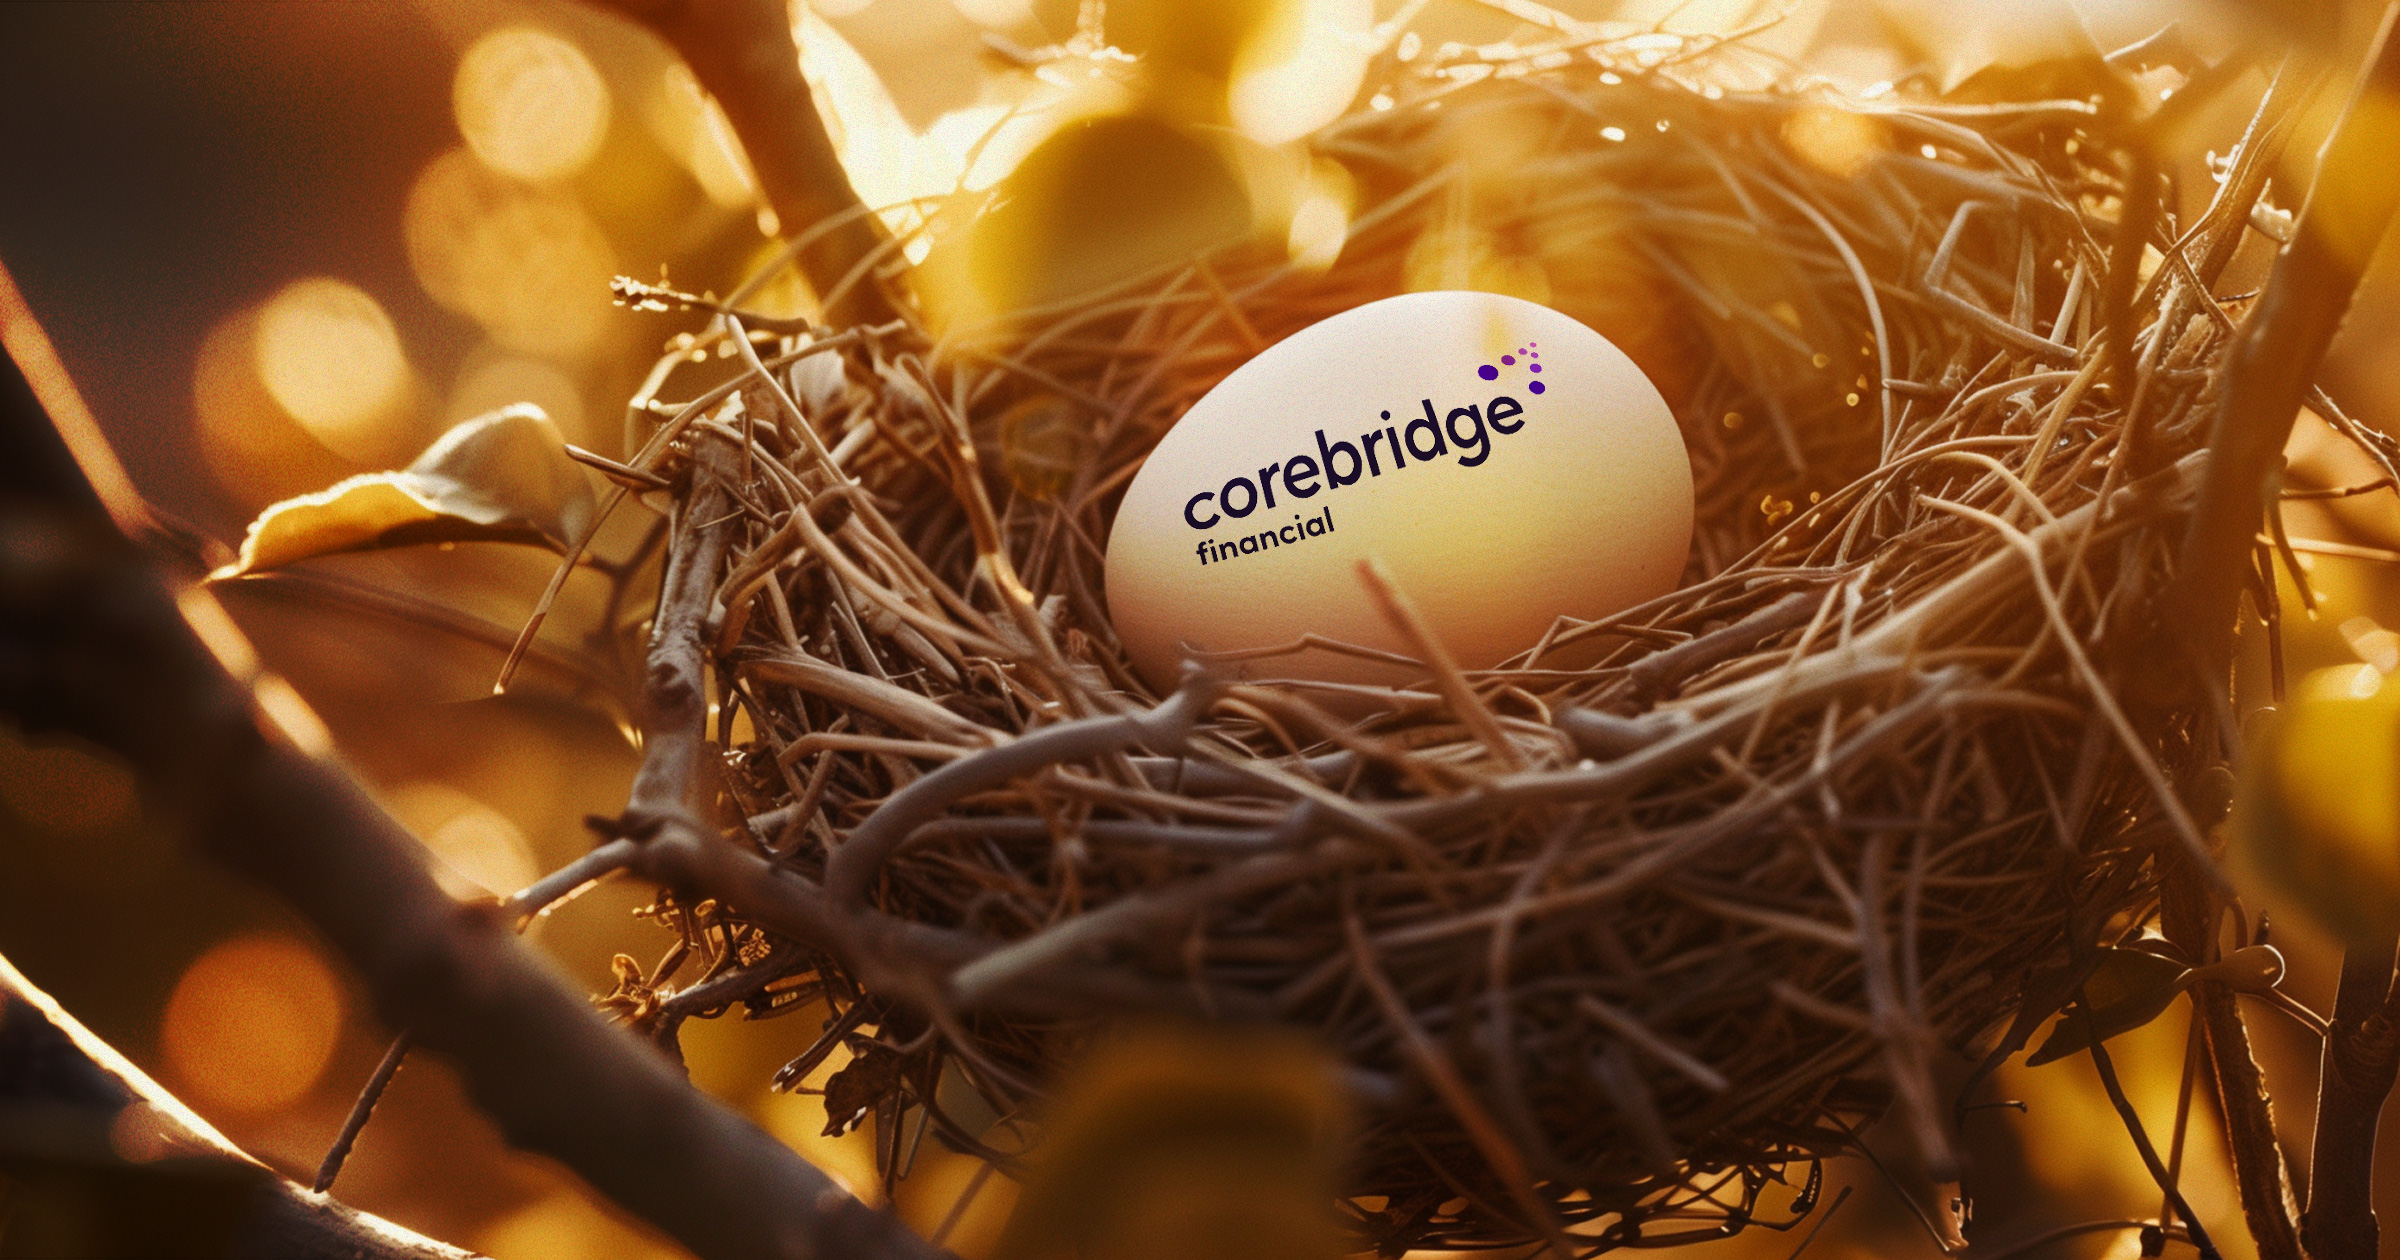 Image shows the Corebridge Financial logo on an egg in a nest